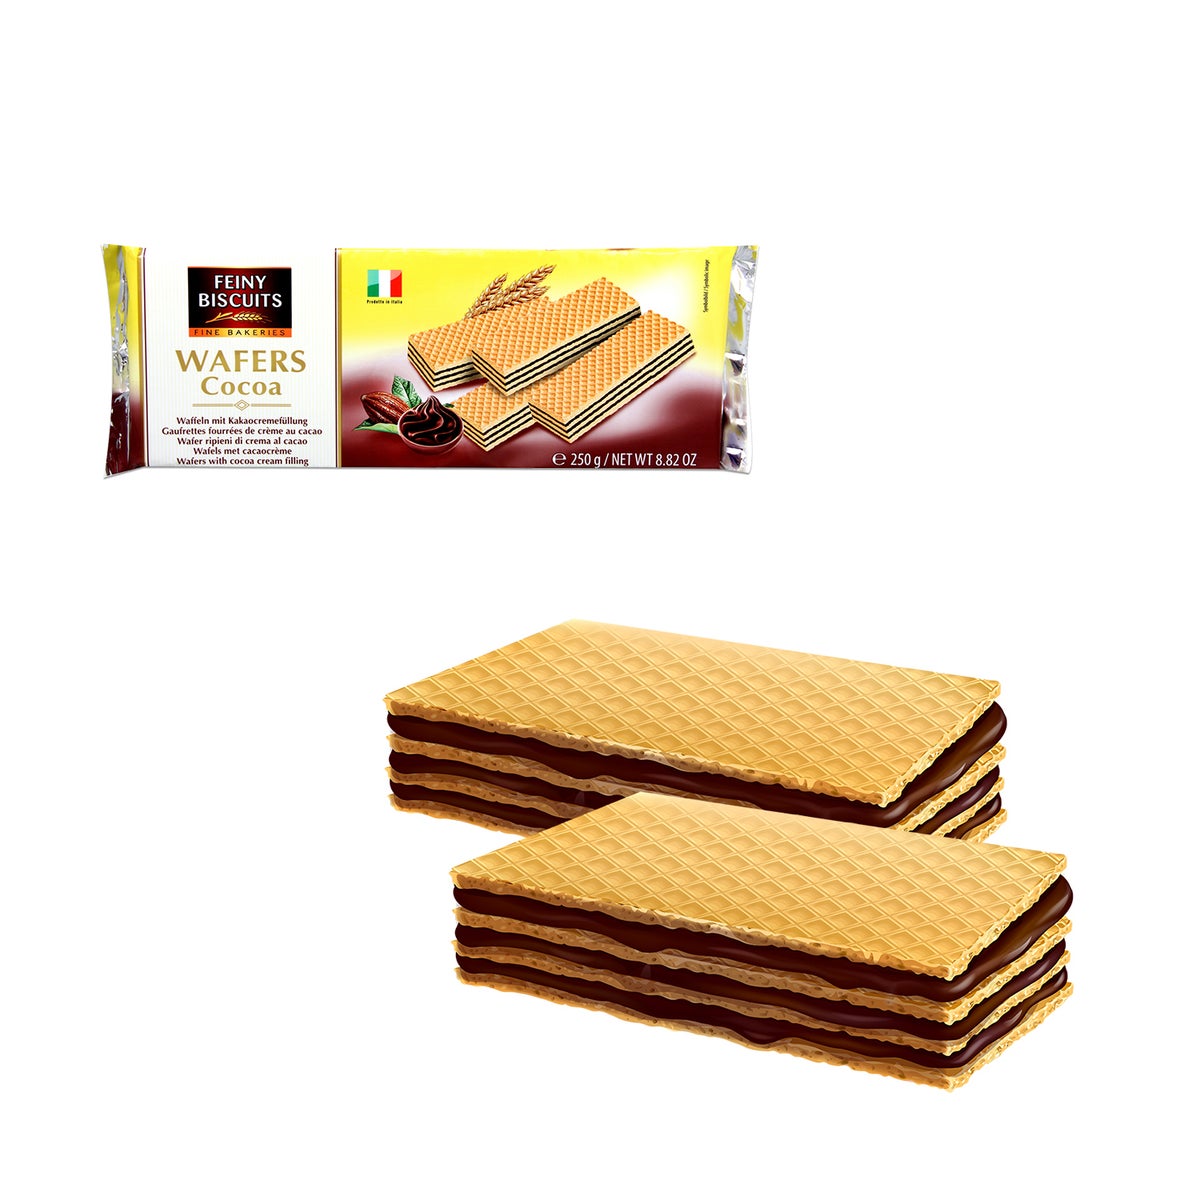 Feiny Biscuits Wafers with Cocoa Cream Filling 8.8oz 250g    900285906379